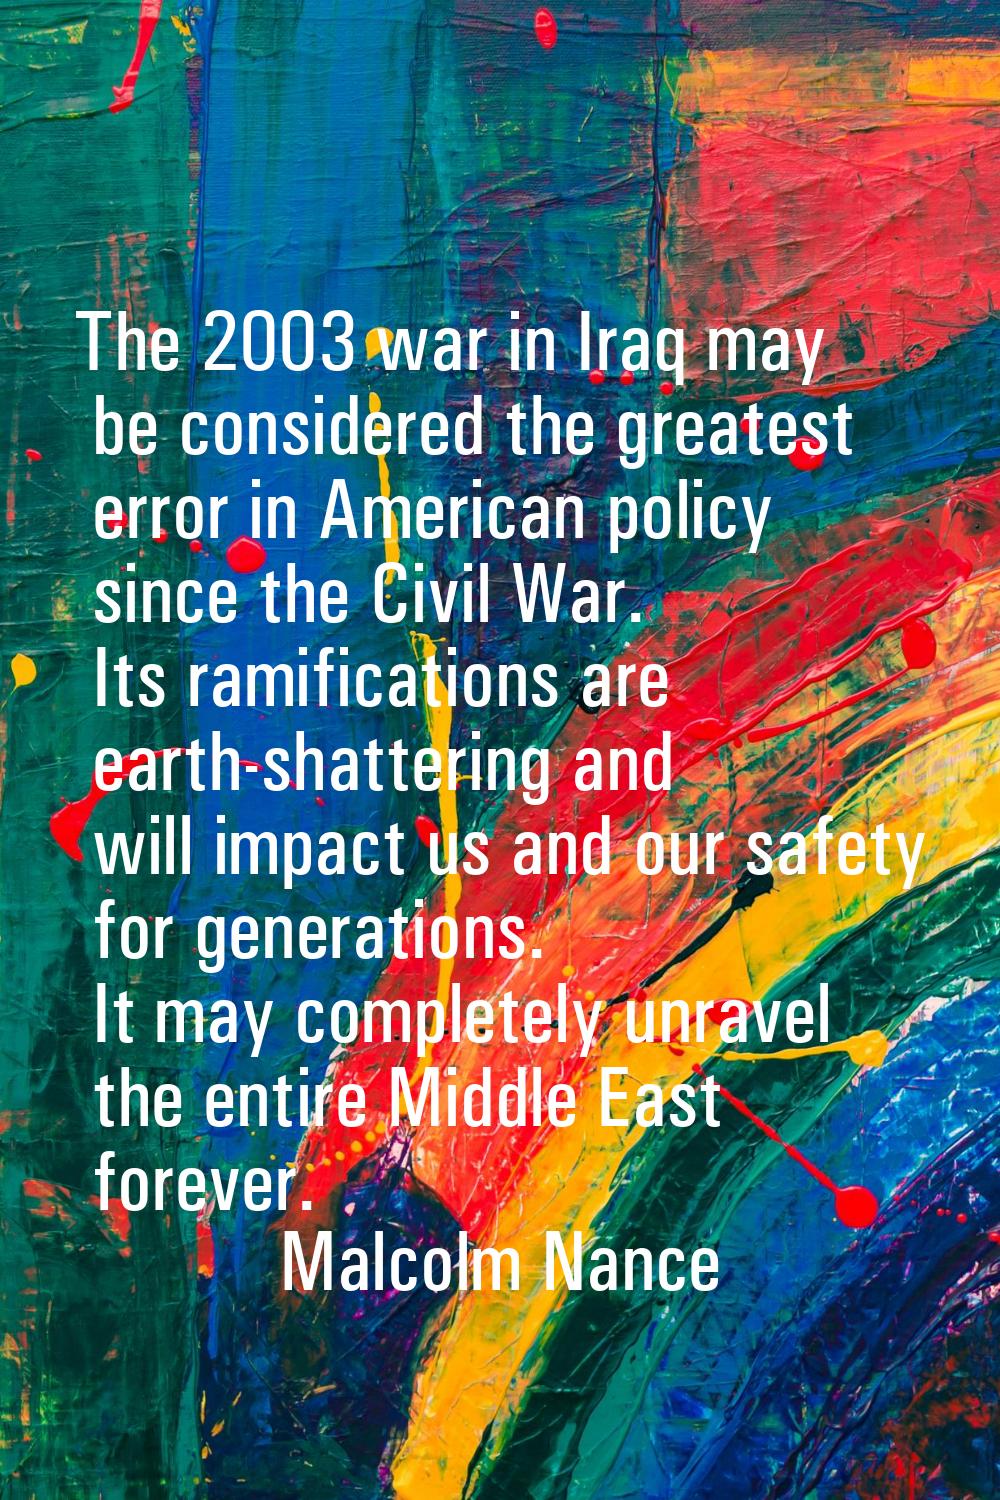 The 2003 war in Iraq may be considered the greatest error in American policy since the Civil War. I